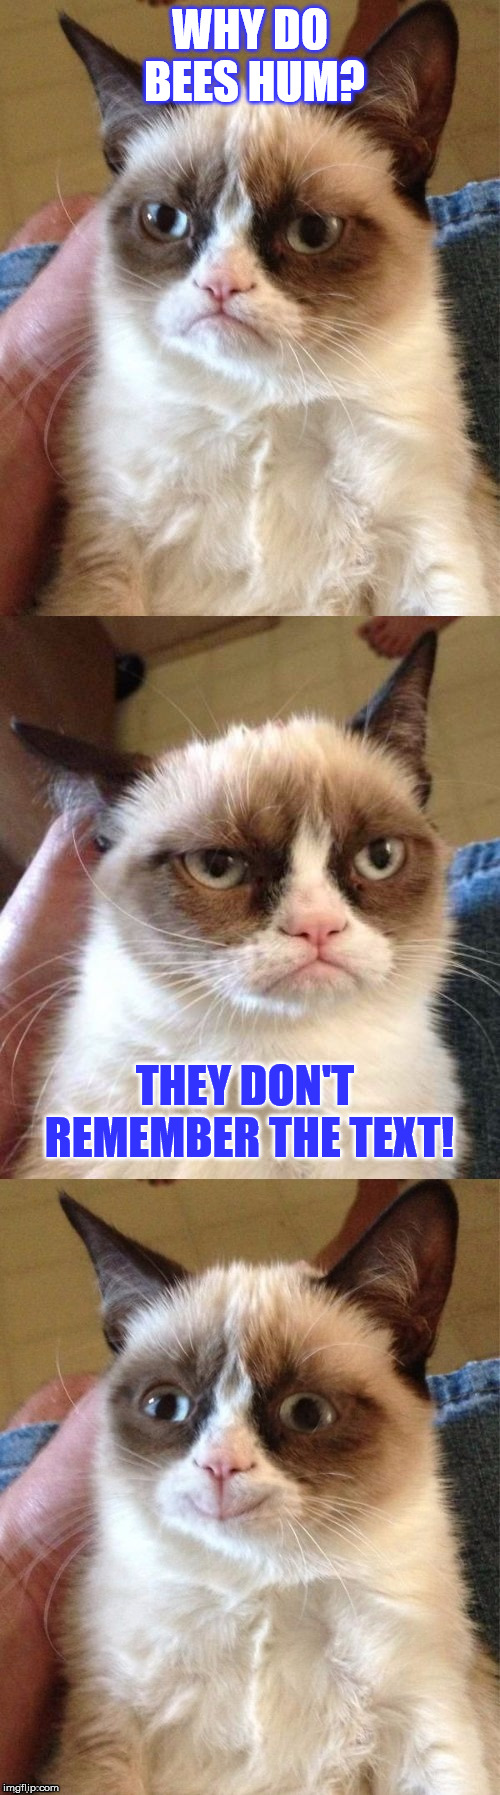 Memory issues, explained by Grumpy Cat | WHY DO BEES HUM? THEY DON'T REMEMBER THE TEXT! | image tagged in bad pun grumpy cat,funny,memes,cat,bad pun,jokes | made w/ Imgflip meme maker